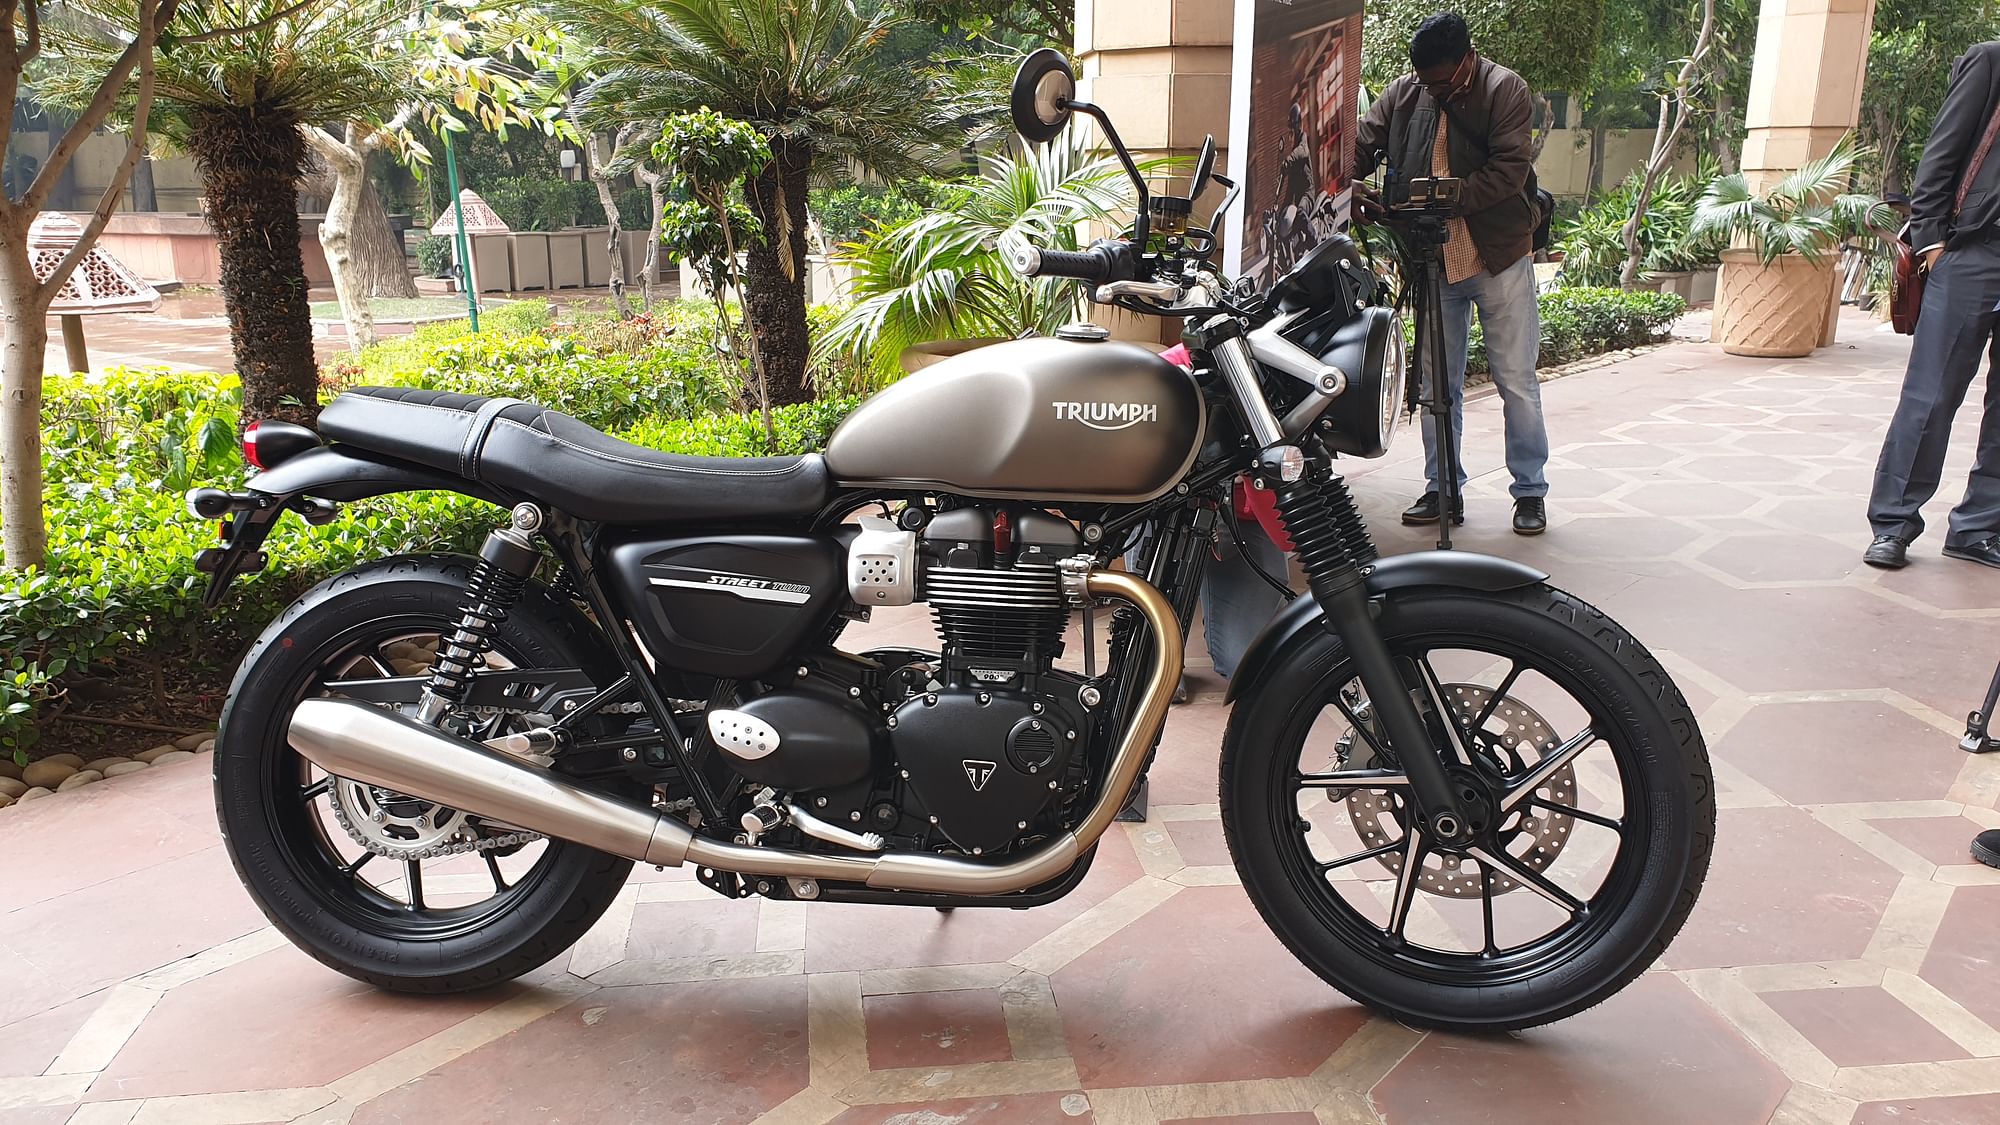 Triumph’s New Street Duo Launched in India, Here’s a First Look